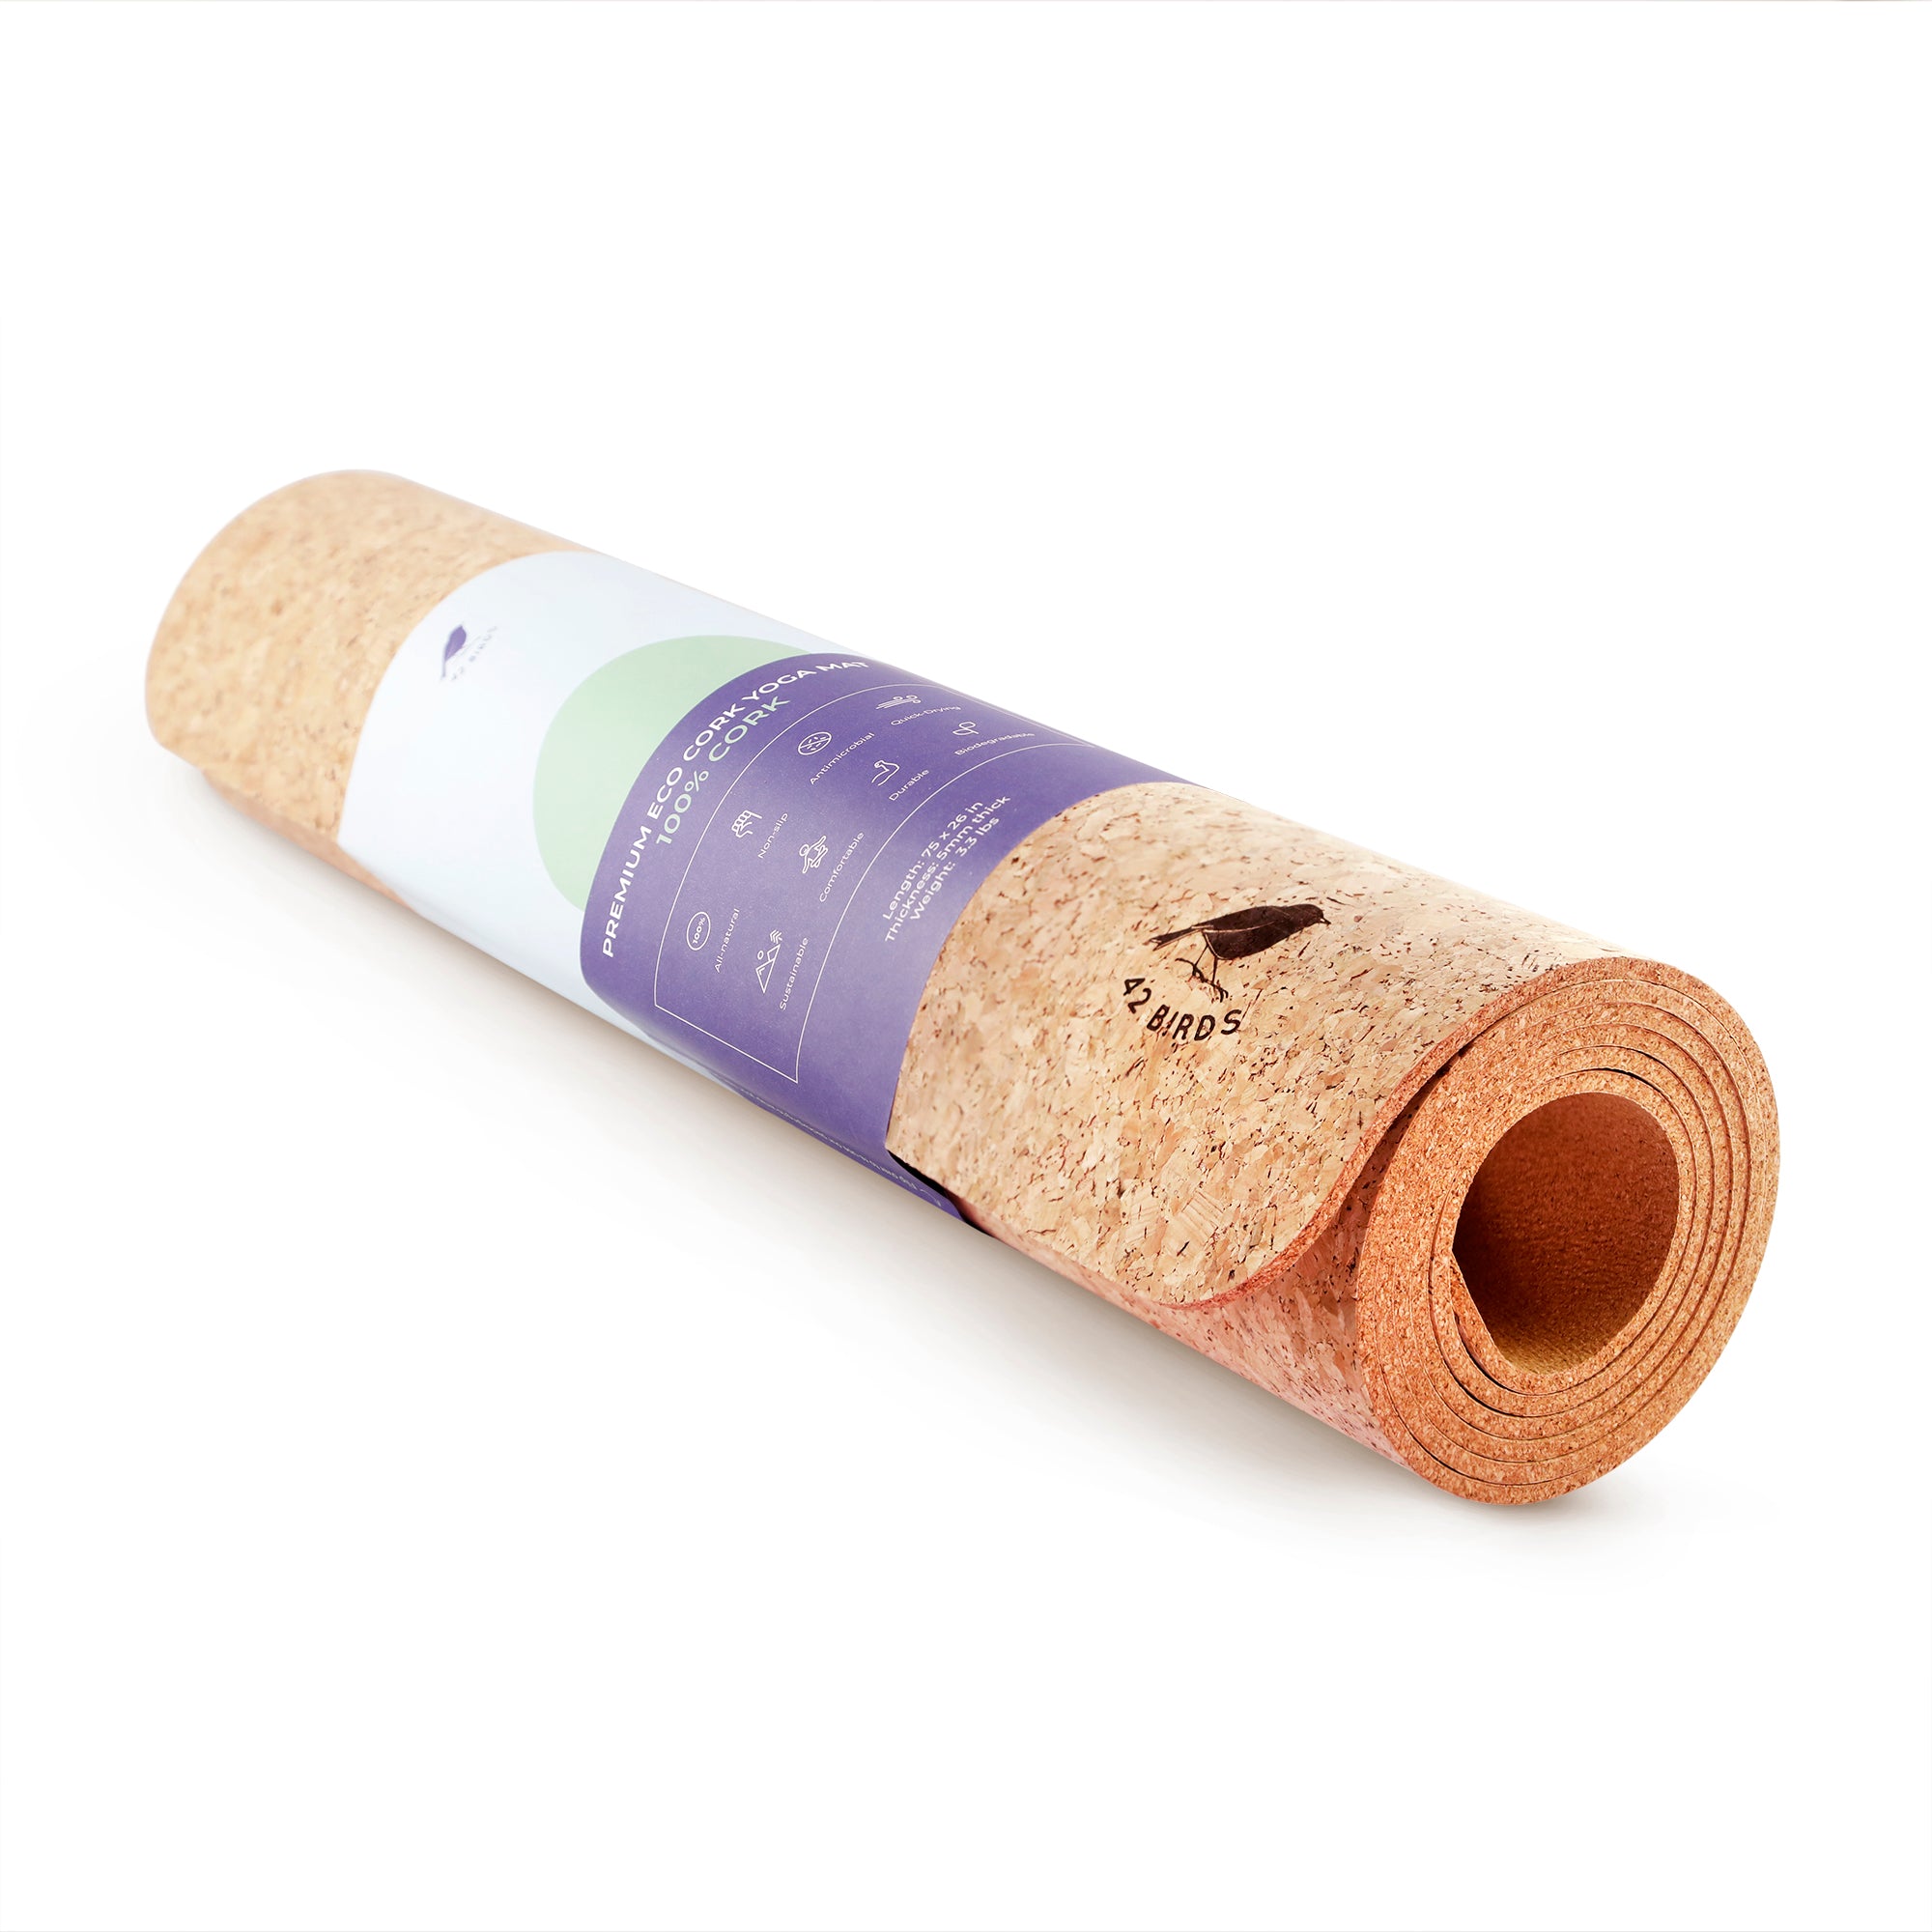 The Best Eco-Friendly Cork Yoga Mats and Yoga Accessories